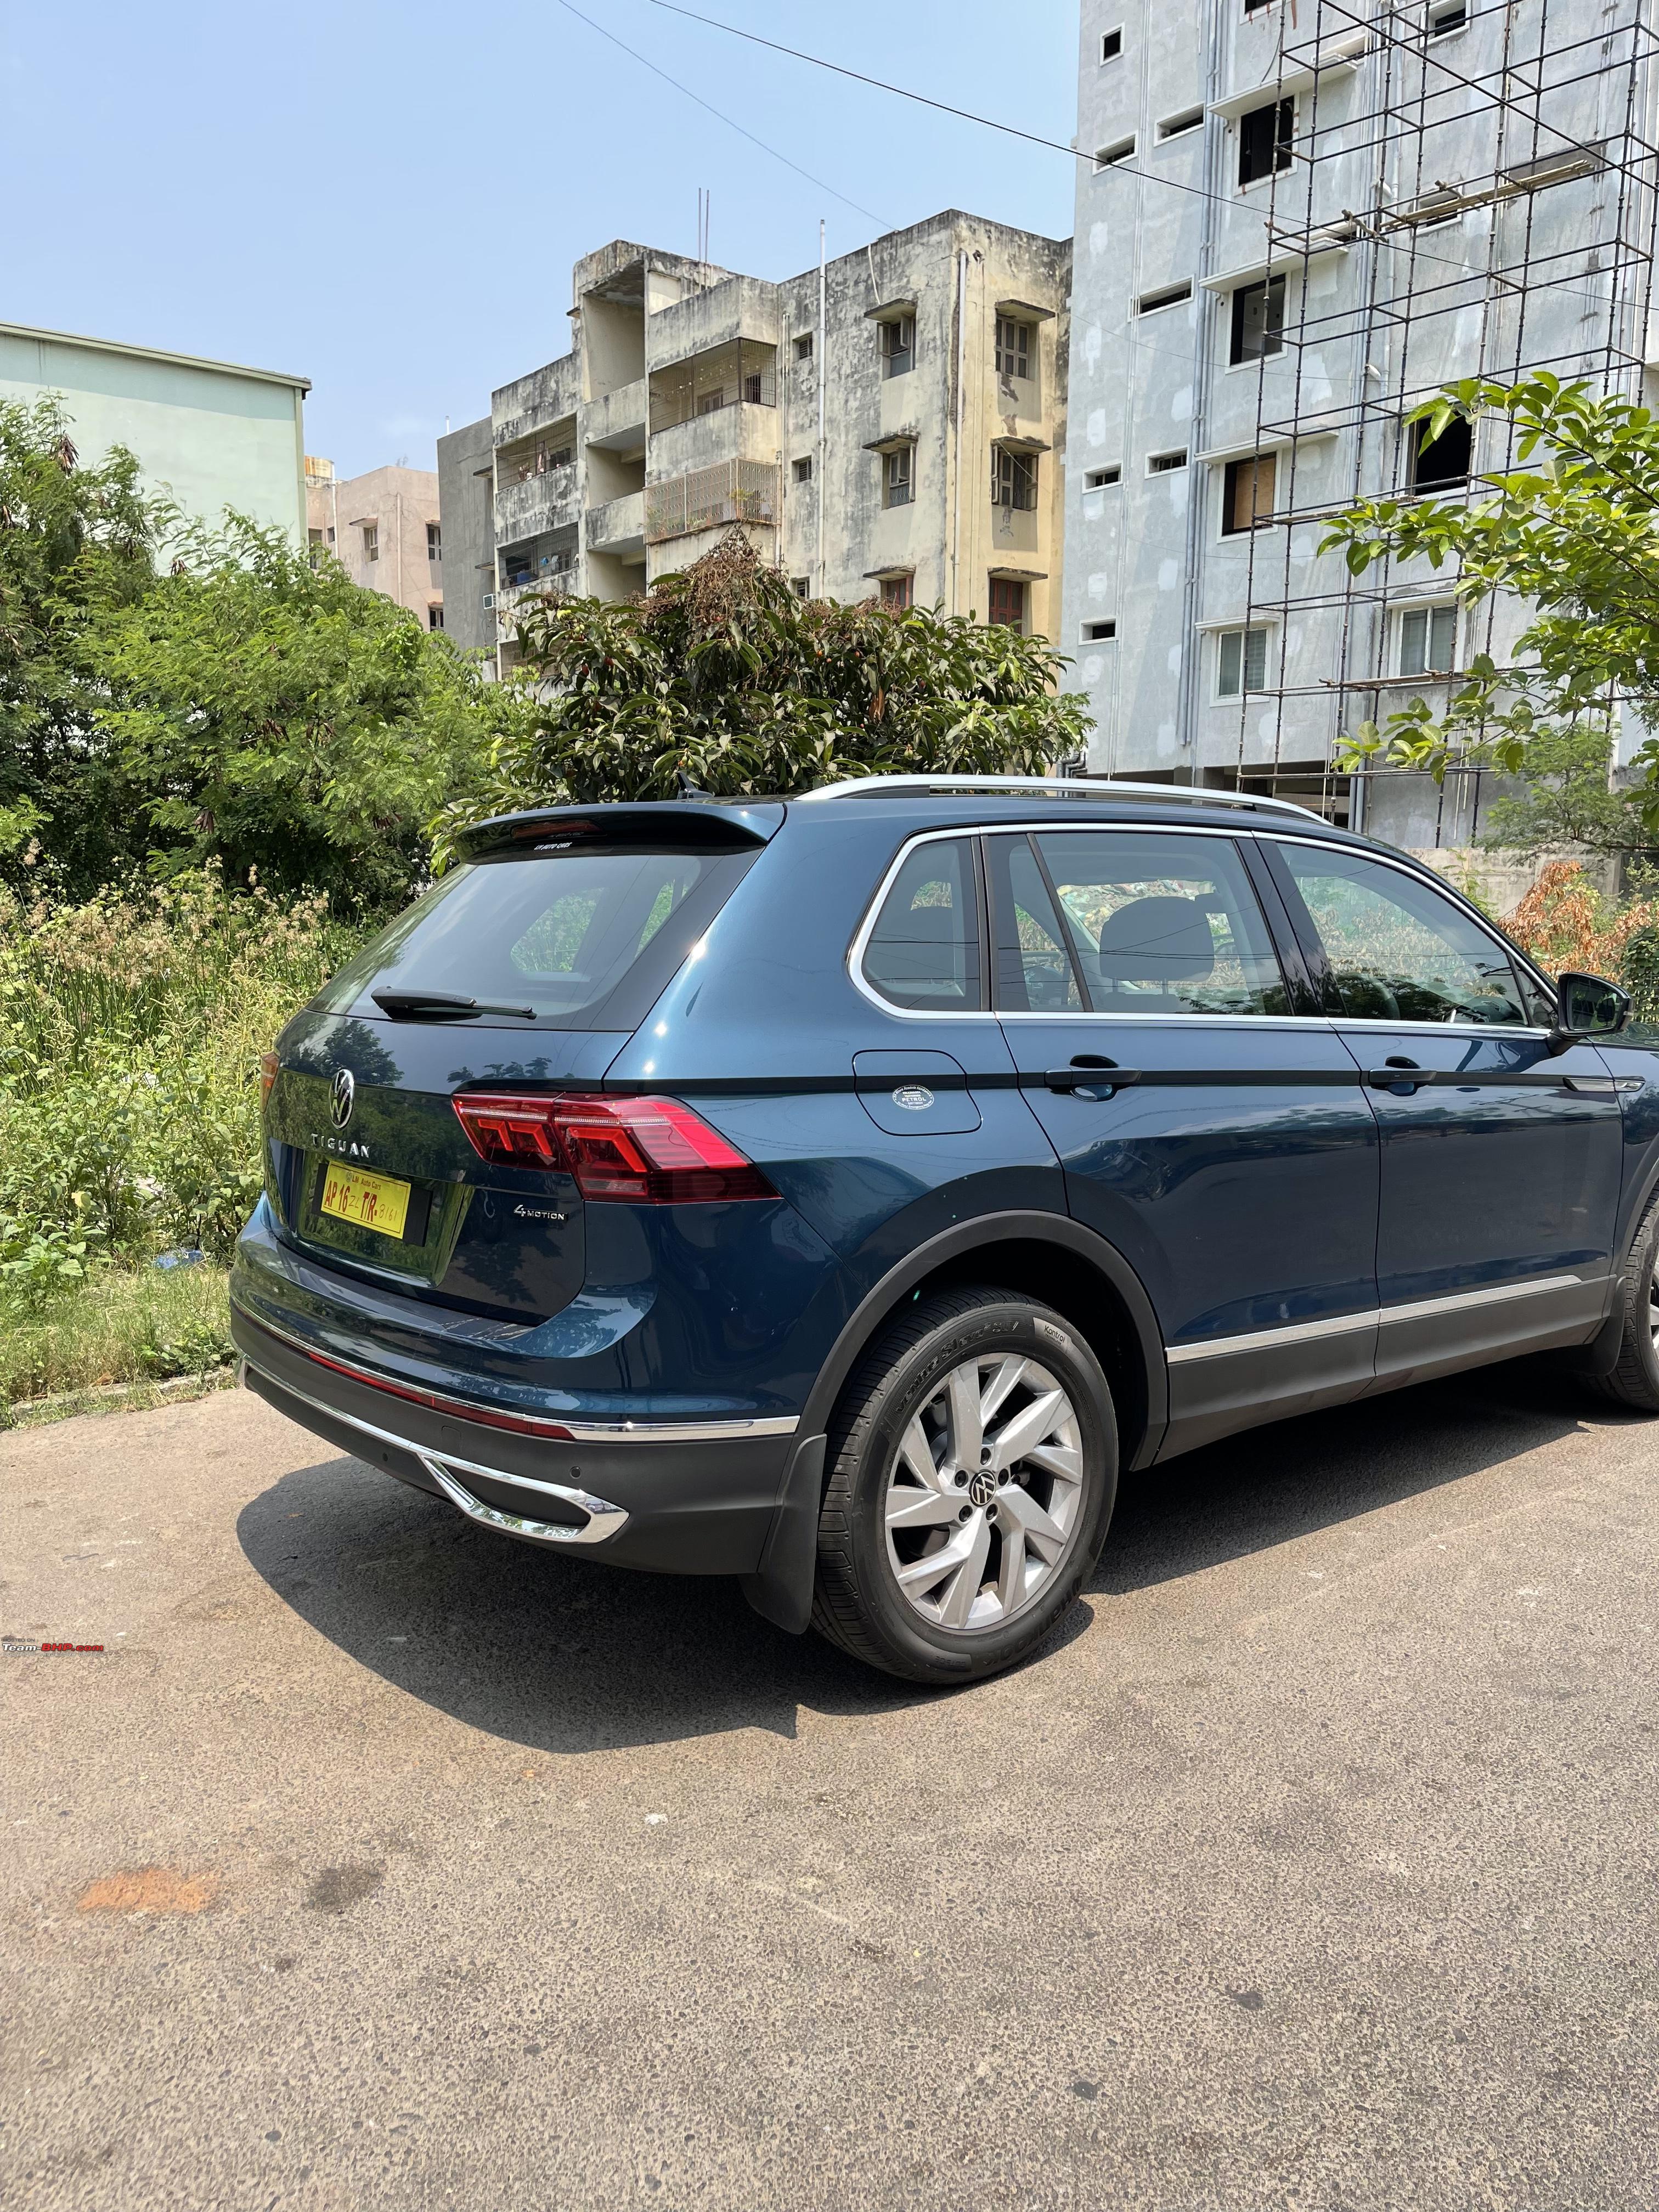 VW Tiguan Facelift 2021: Observations after a day of driving